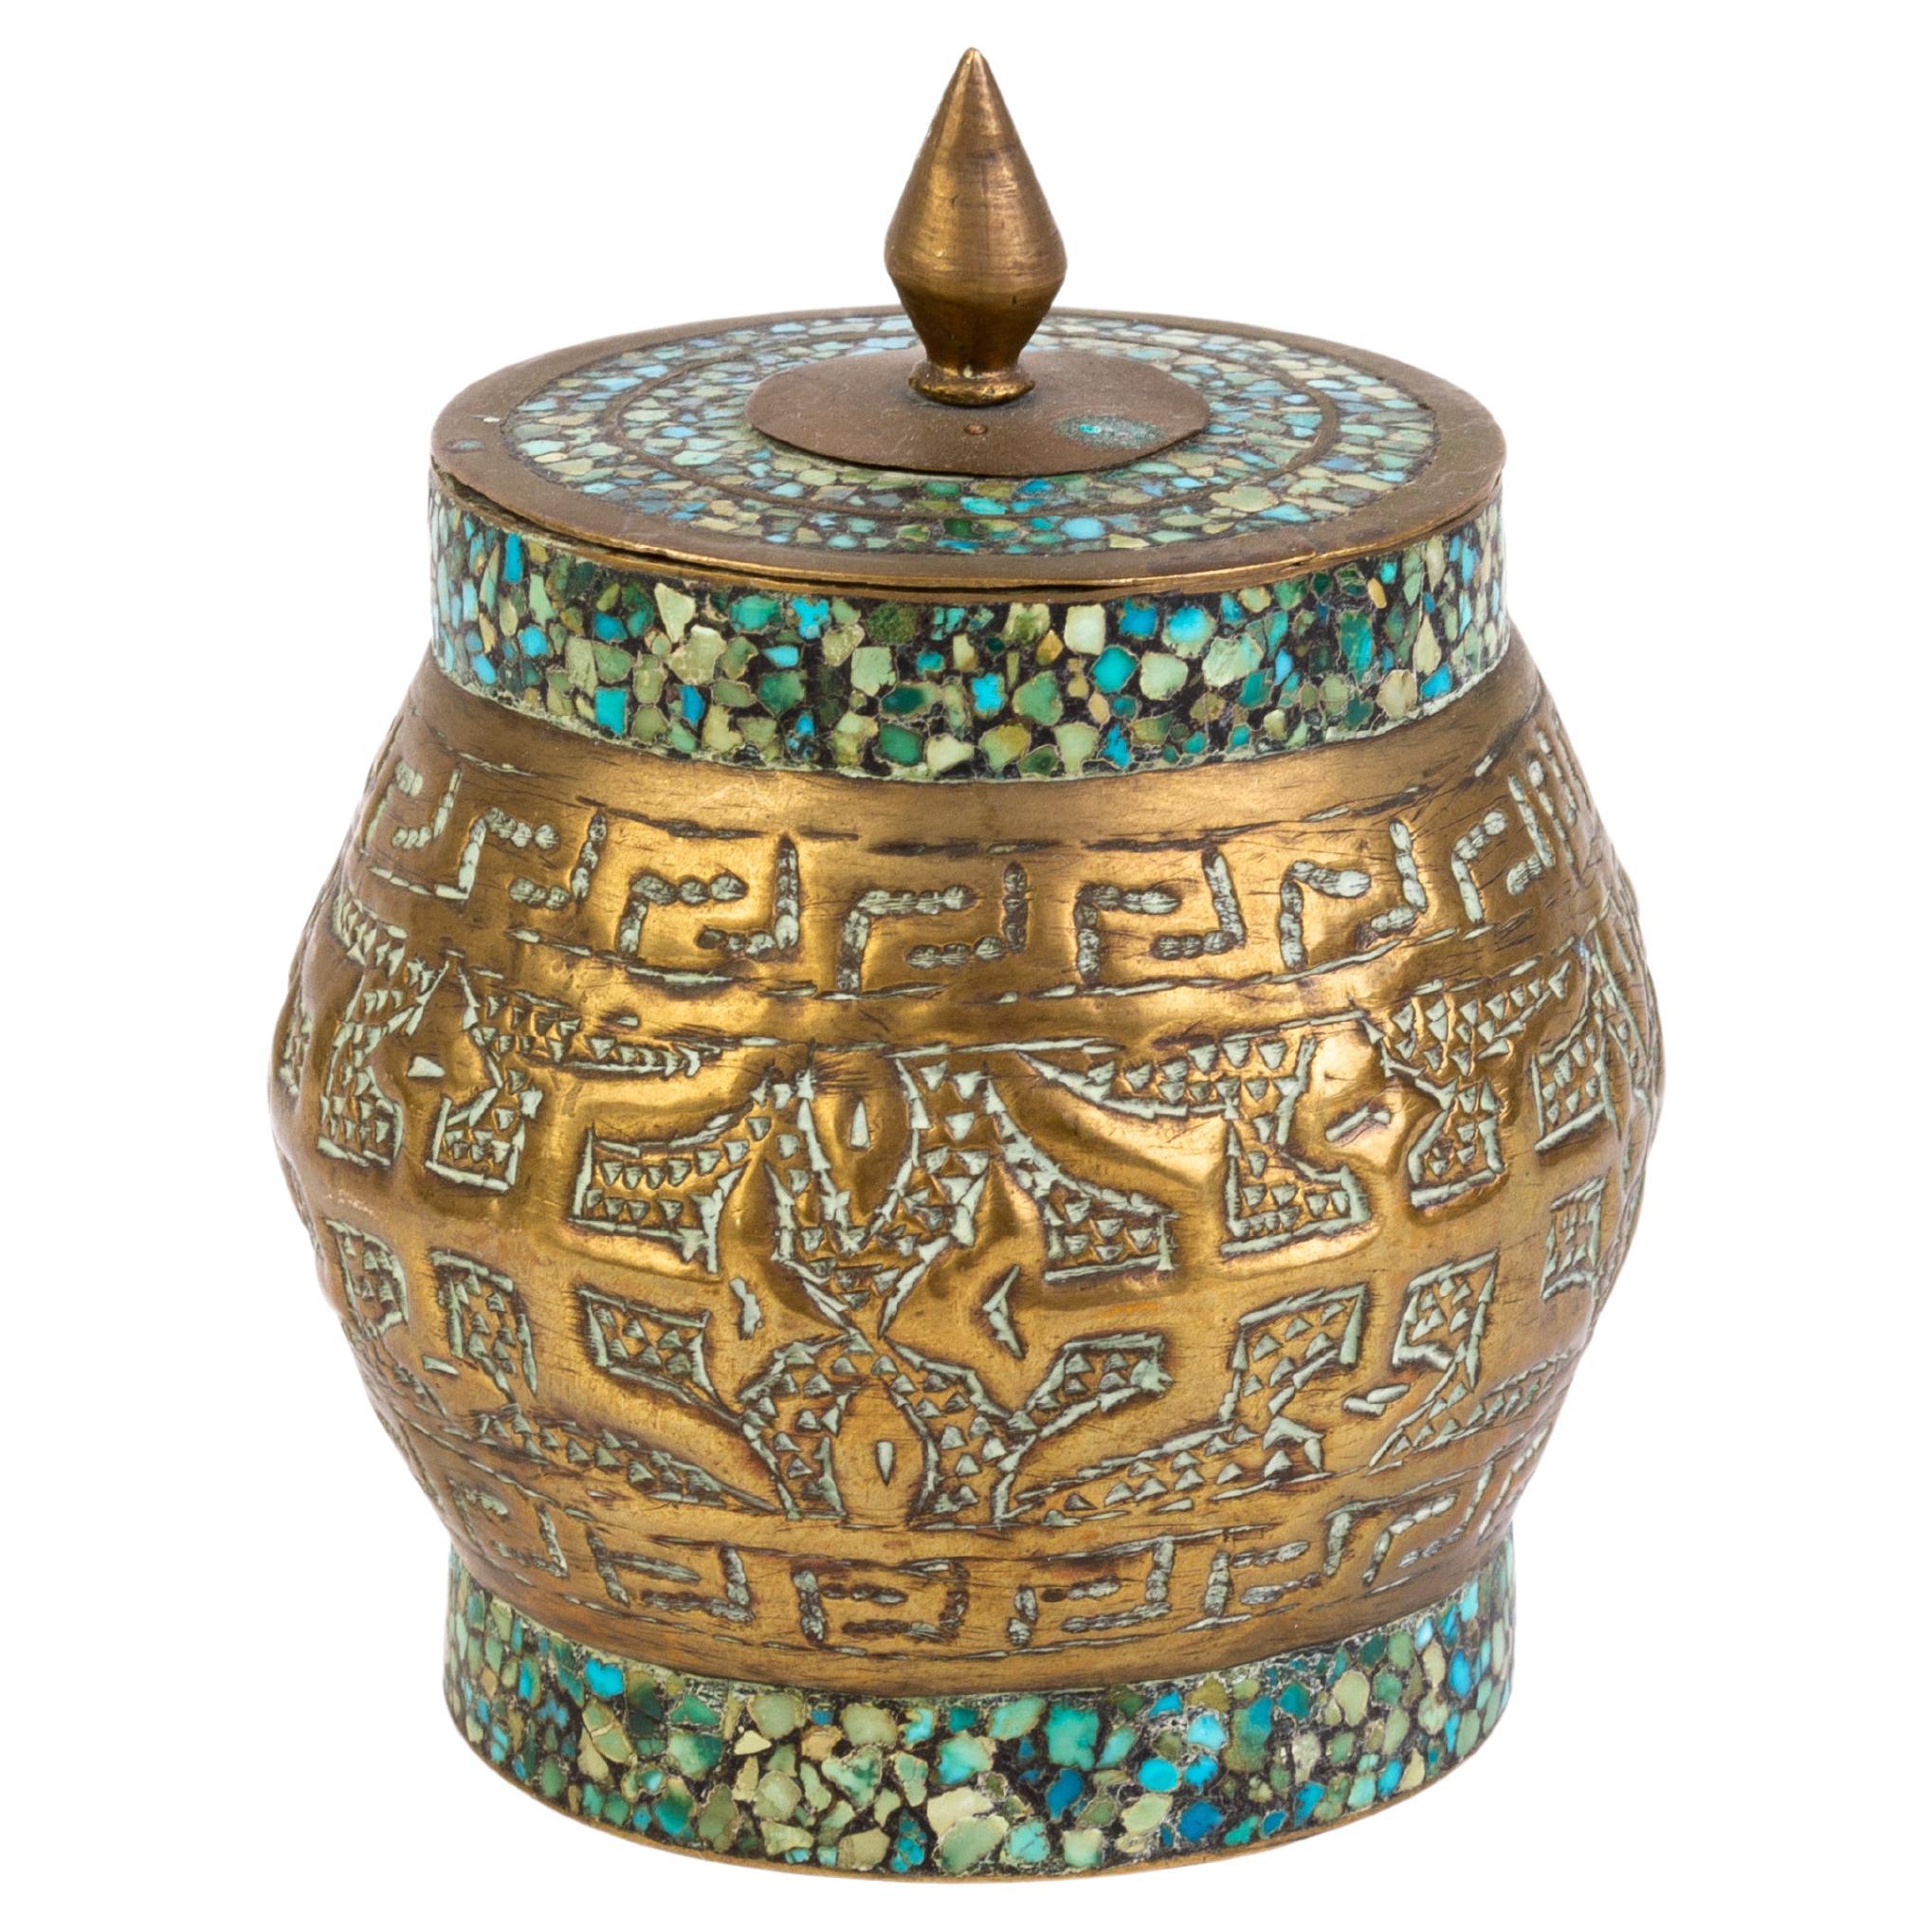 Chinese Tibetan Inlaid Turquoise Mosaic Brass Lidded Jar 19th Century  For Sale